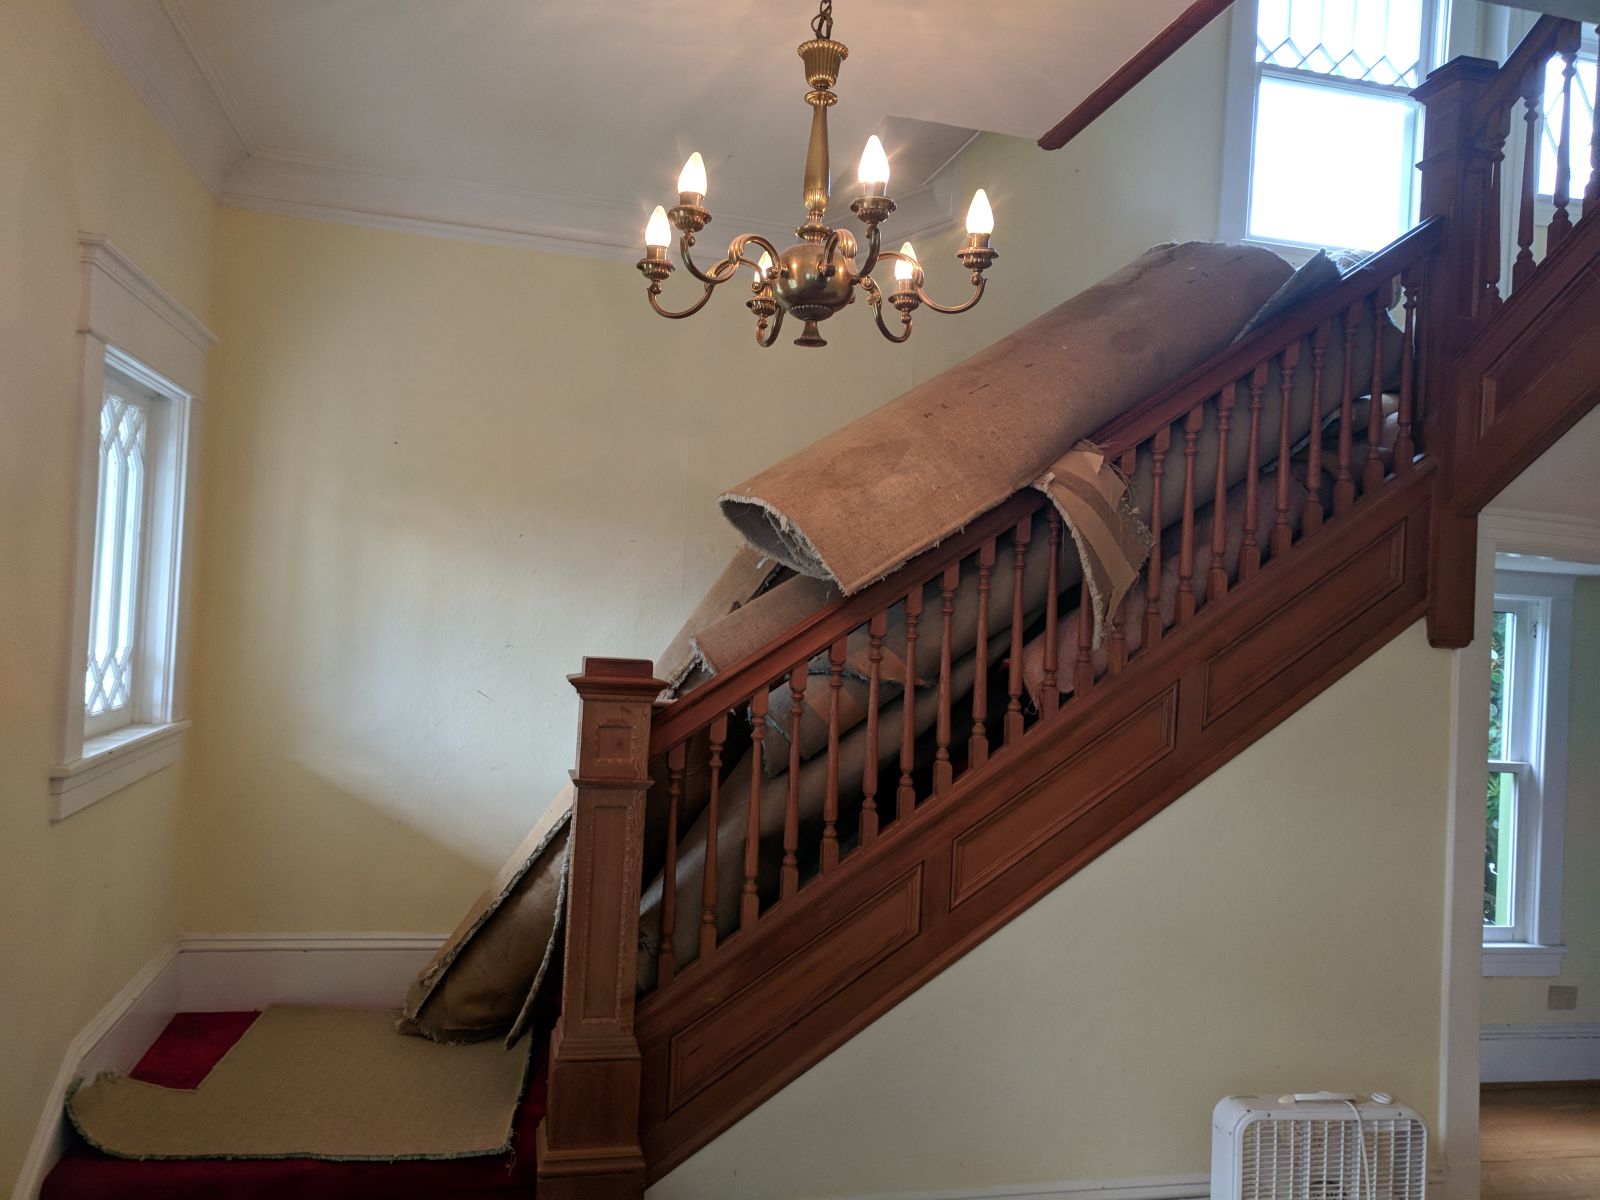 Fools! You can never get upstairs again.